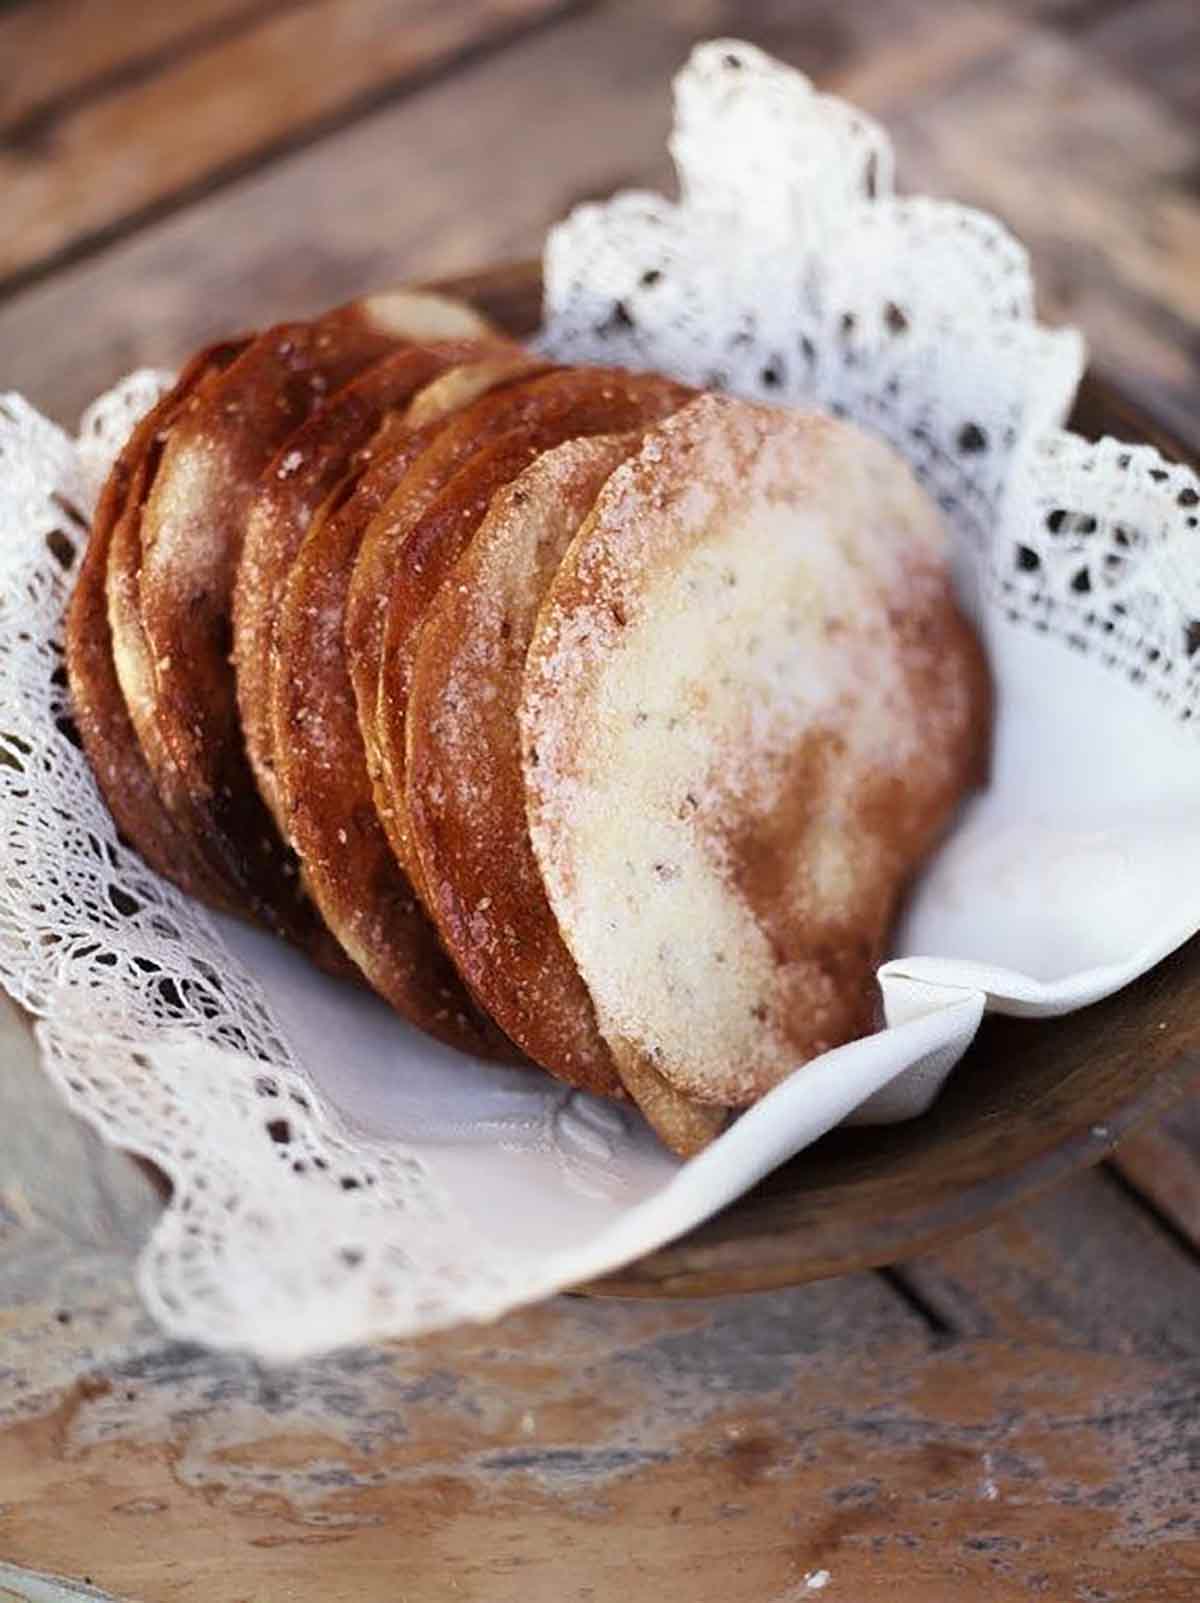 Several Spanish olive oil tortas in a bowl lined with a lace linen cloth.